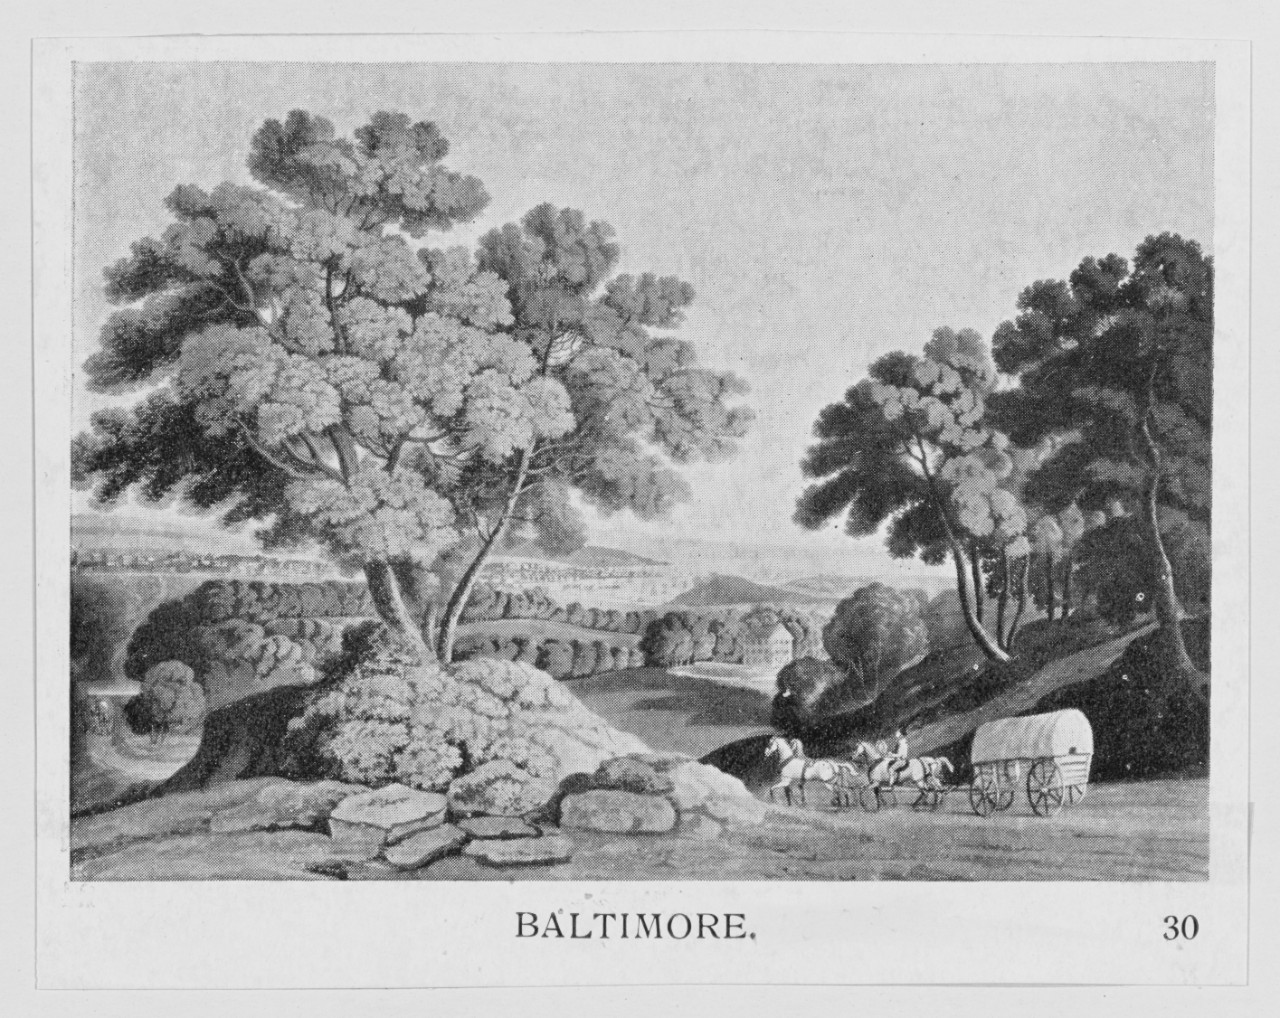 Baltimore in 1802